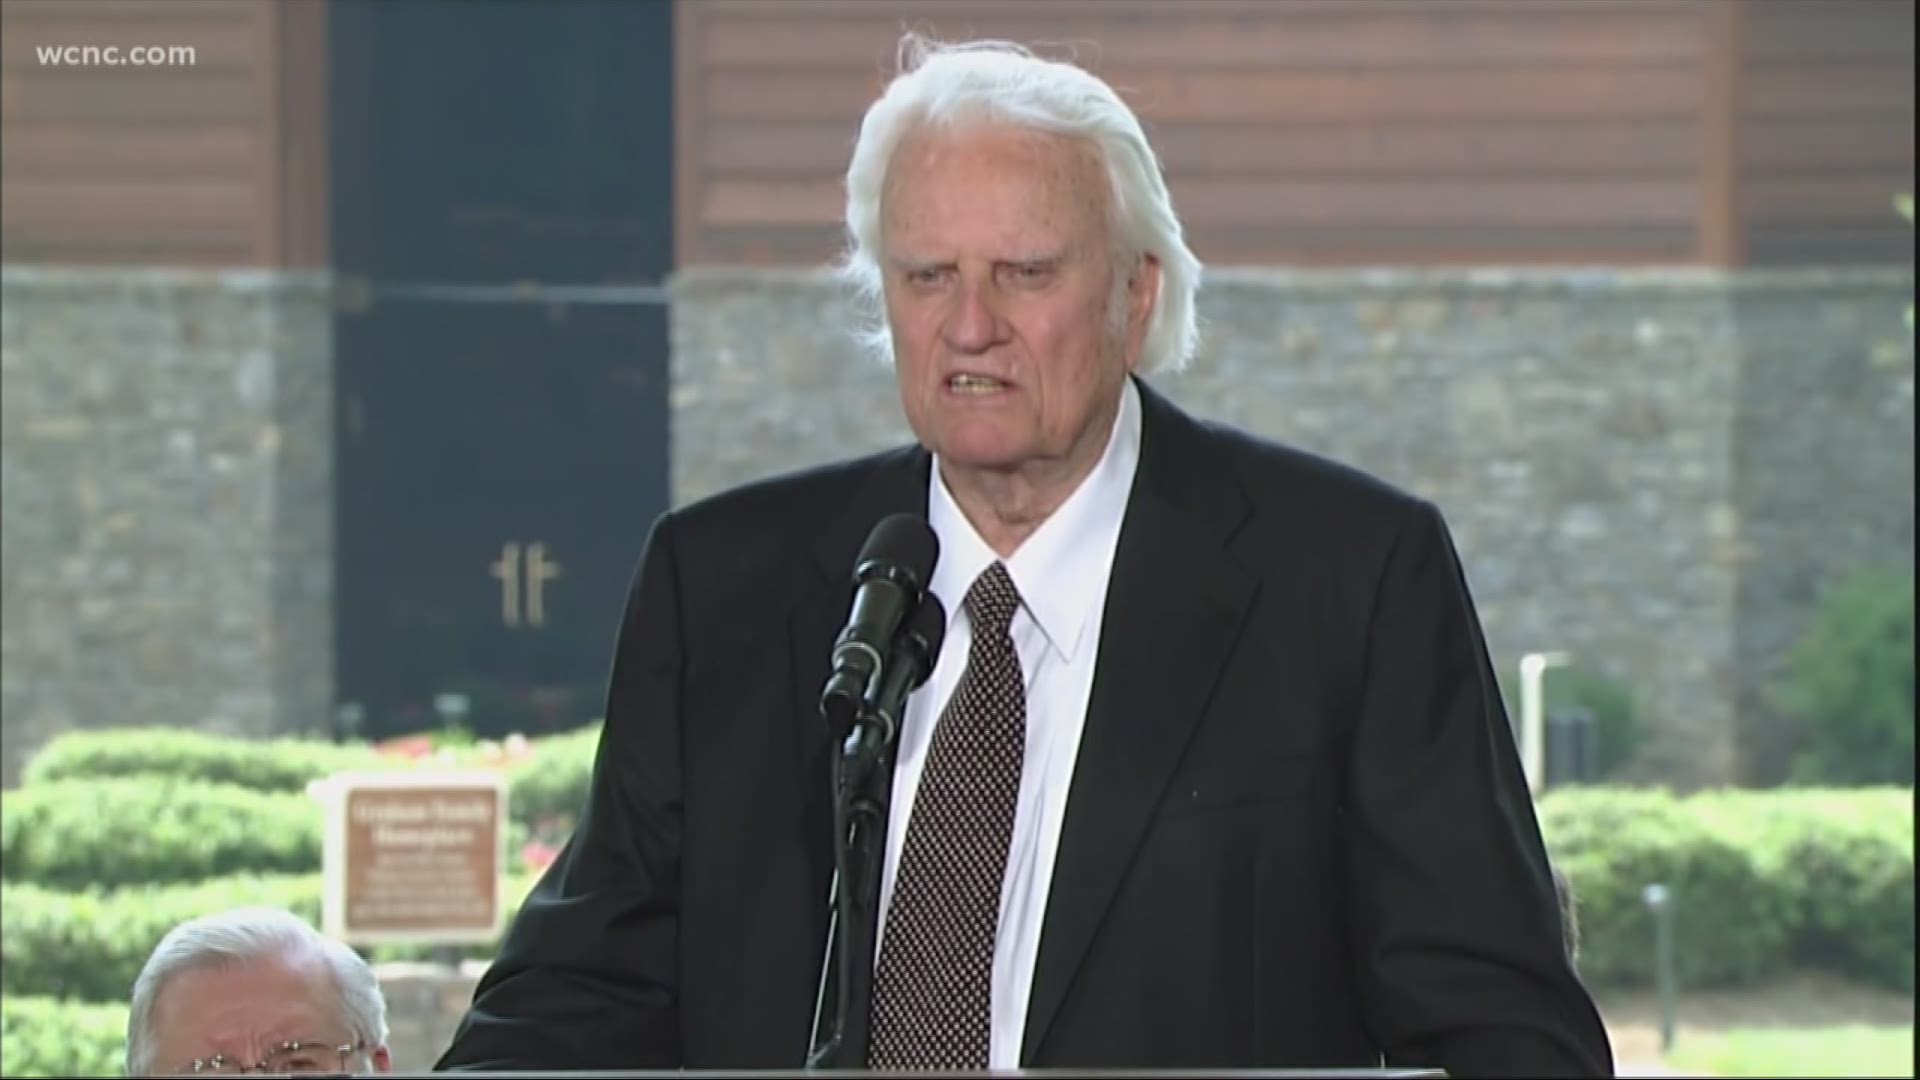 Thursday makes the one-year anniversary of the death of "America's pastor" and Charlotte's favorite son, Rev. Billy Graham.